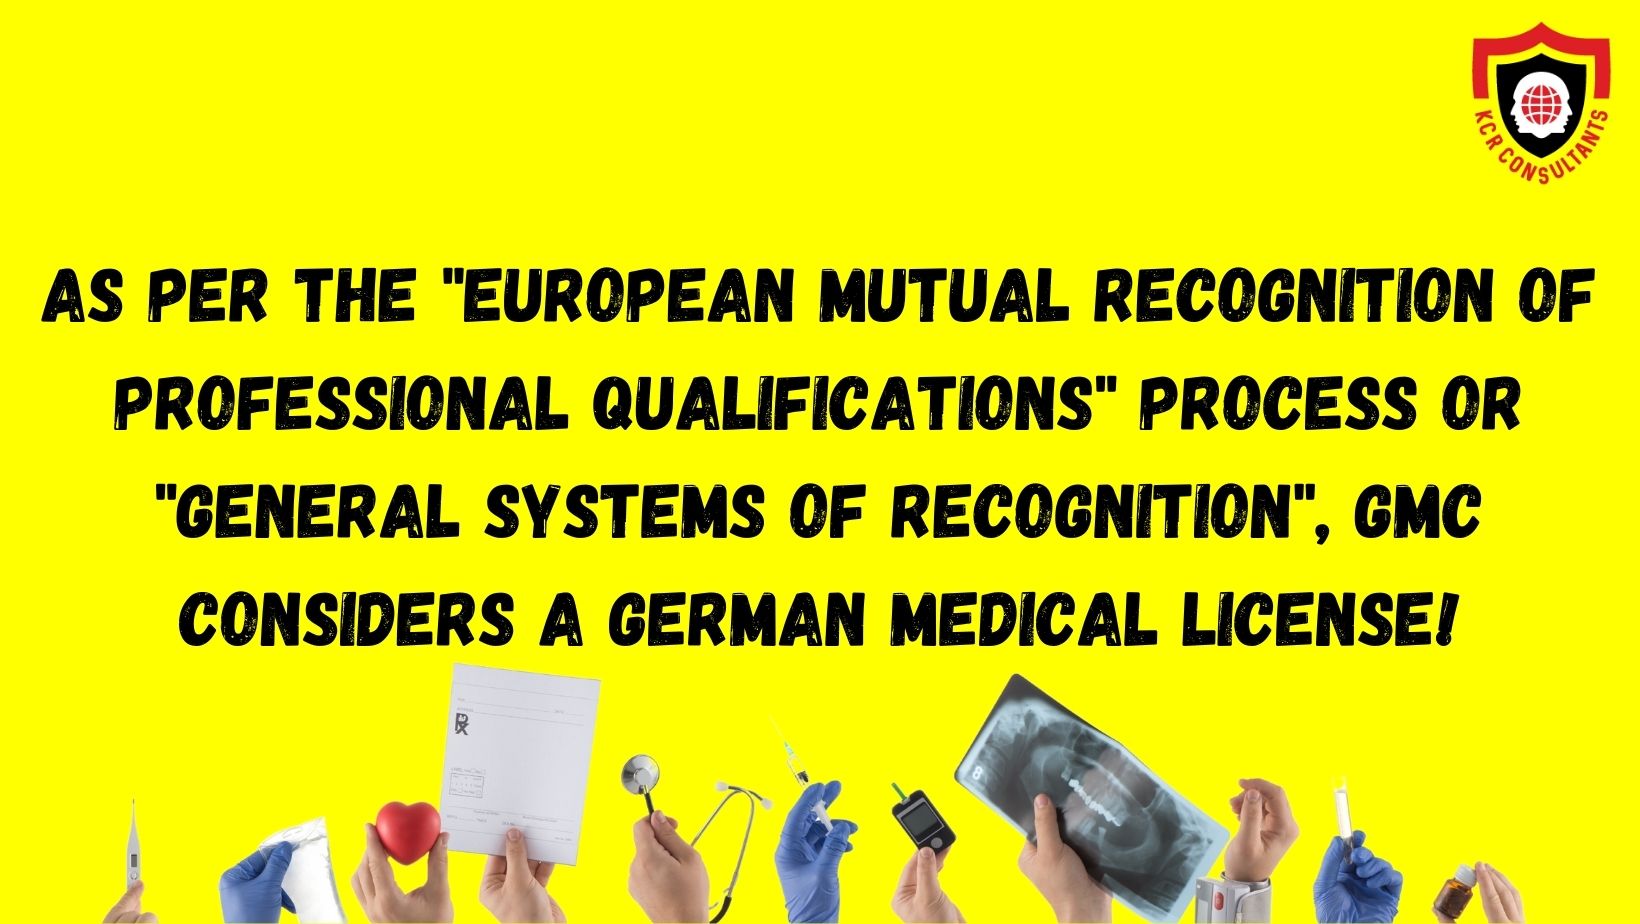 Is German Medical PG valid in the UK? An Overview!